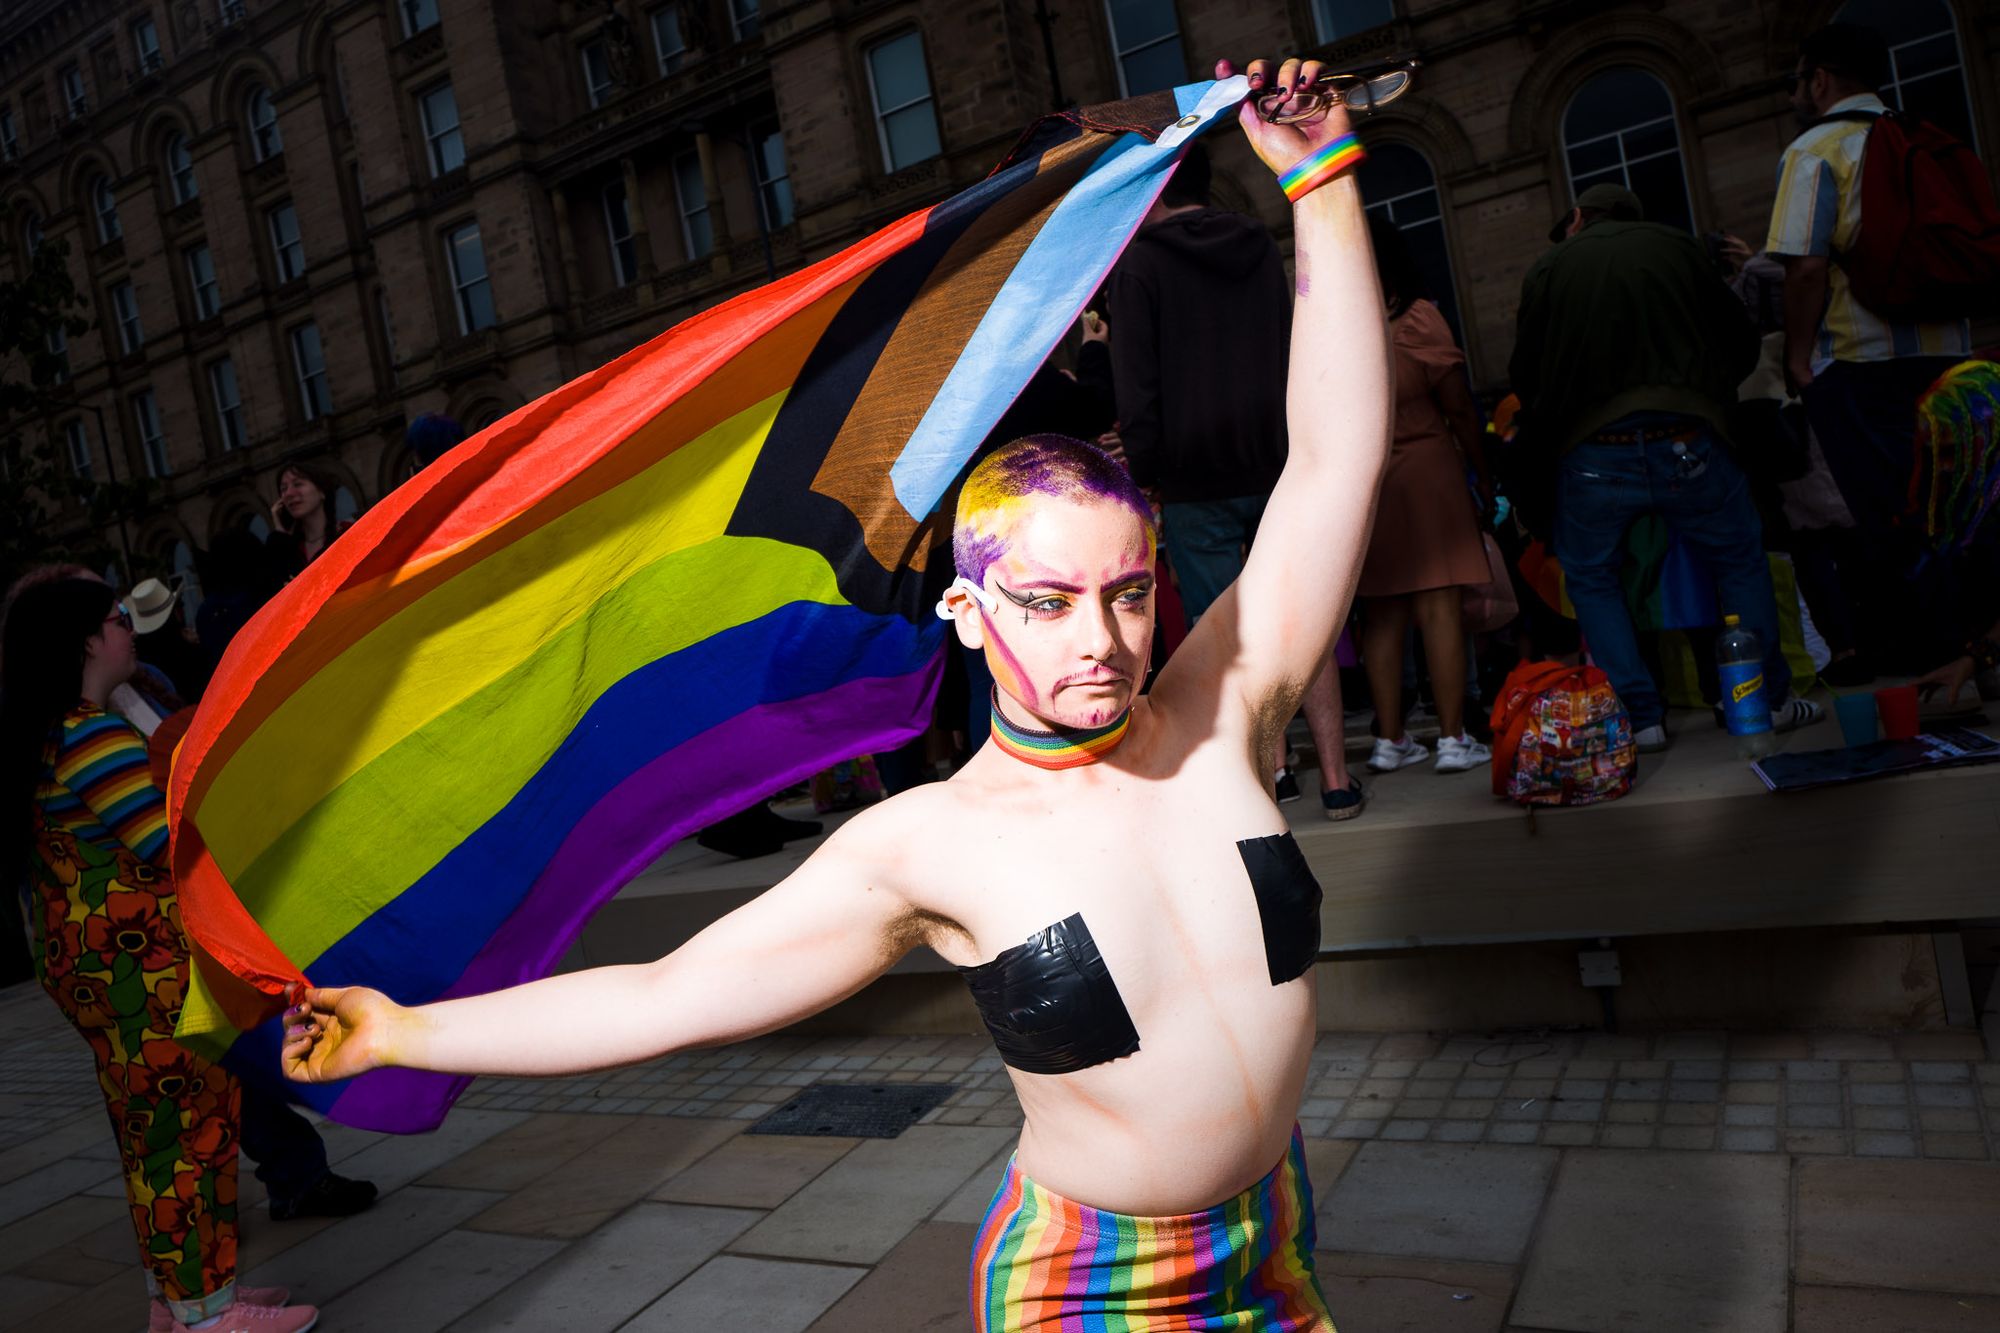 A person wearing black tape over their chest waves the progress pride flag around.